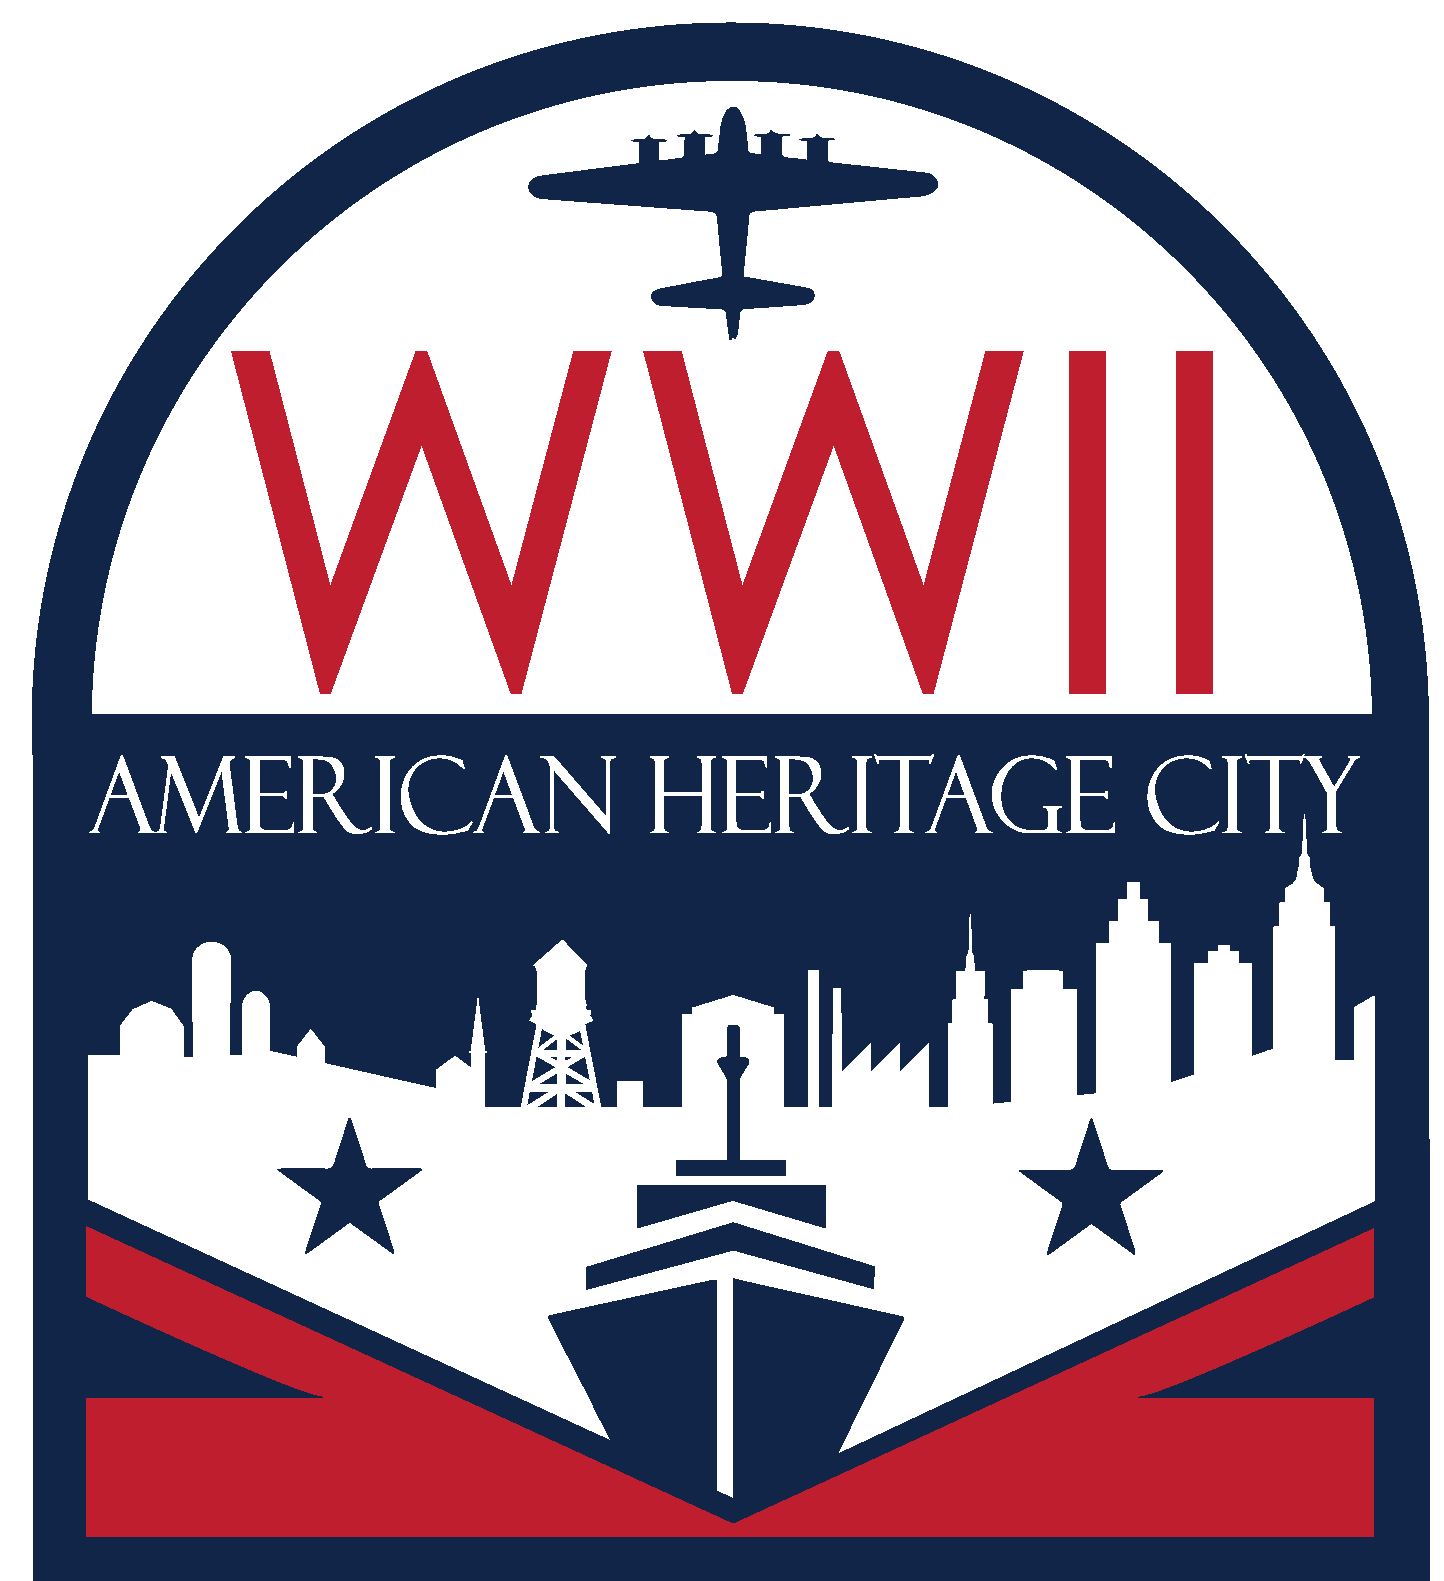 Image of the WWII Hertiage City logo